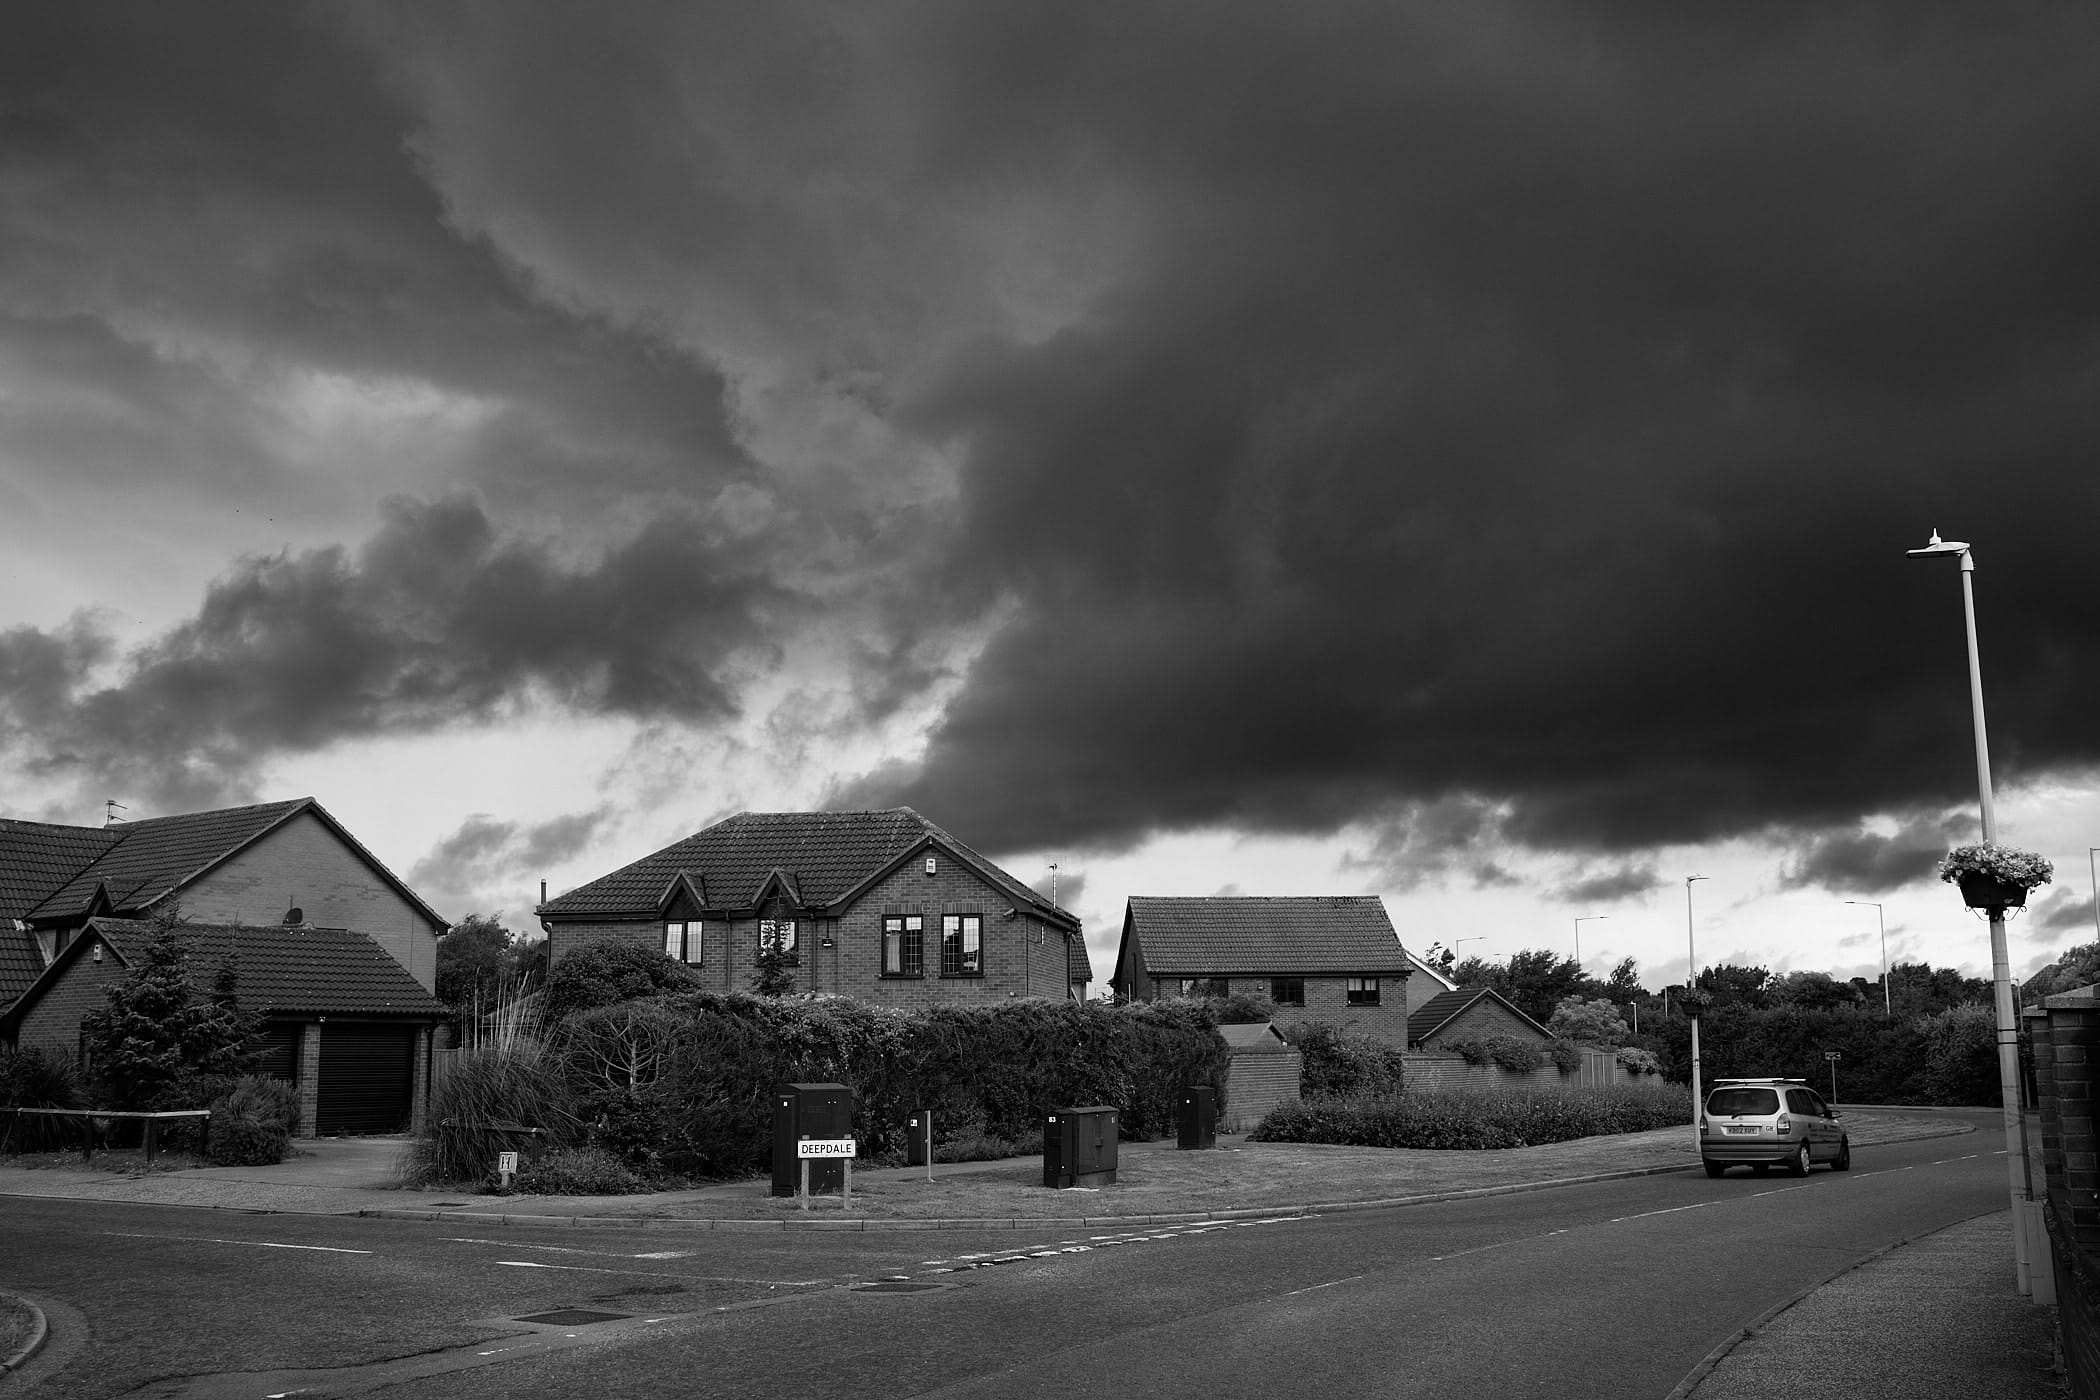 stormclouds over residential area